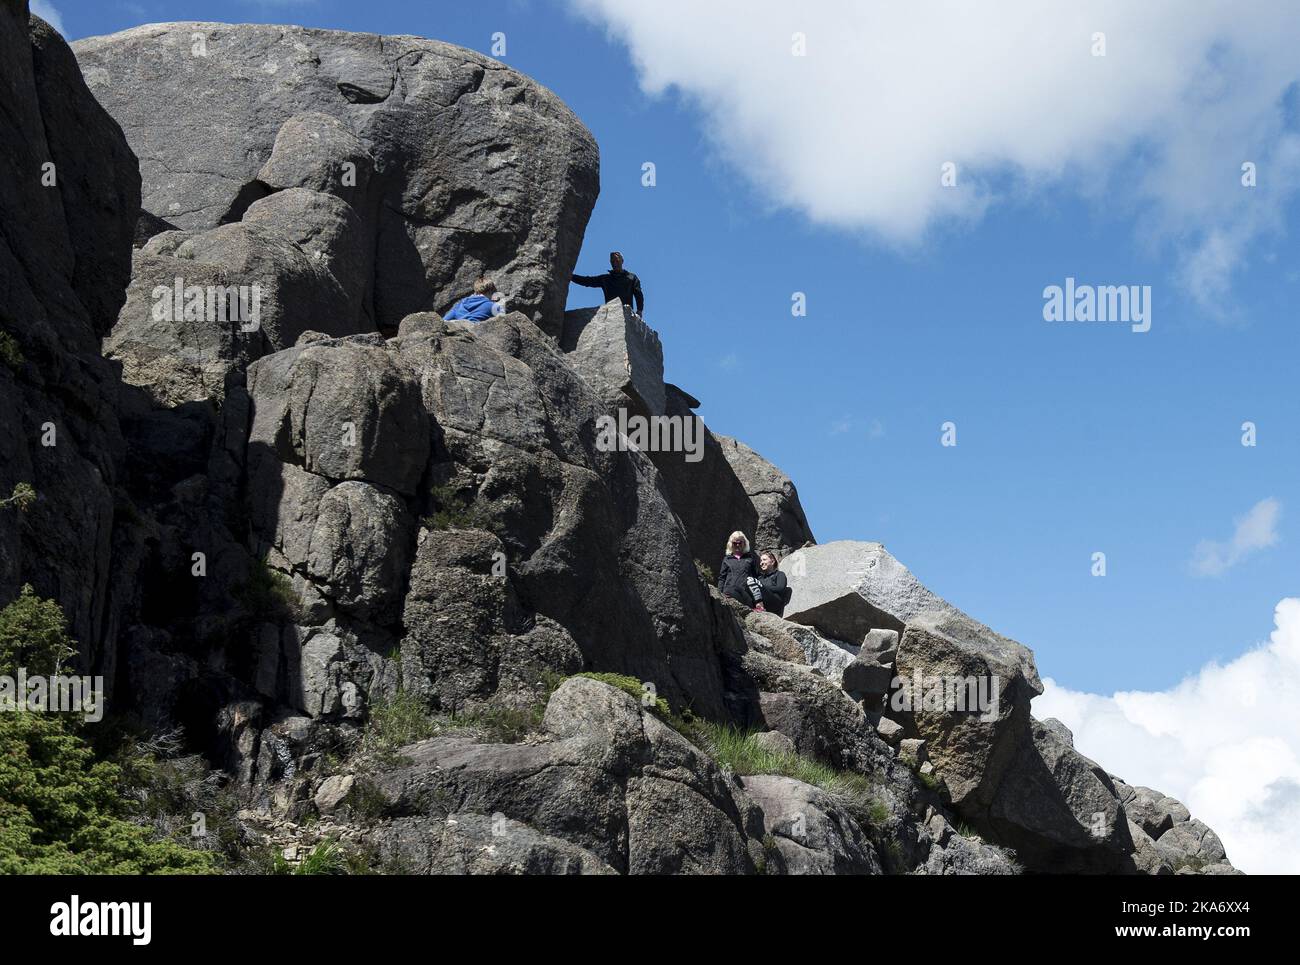 Kjervall, Egersund 20170624. The rock formation Trollpikken in Rogaland , western Norway has probably been vandalized during the night between Friday and Saturday. Poto: Carina Johansen / NTB Scanpix  Stock Photo